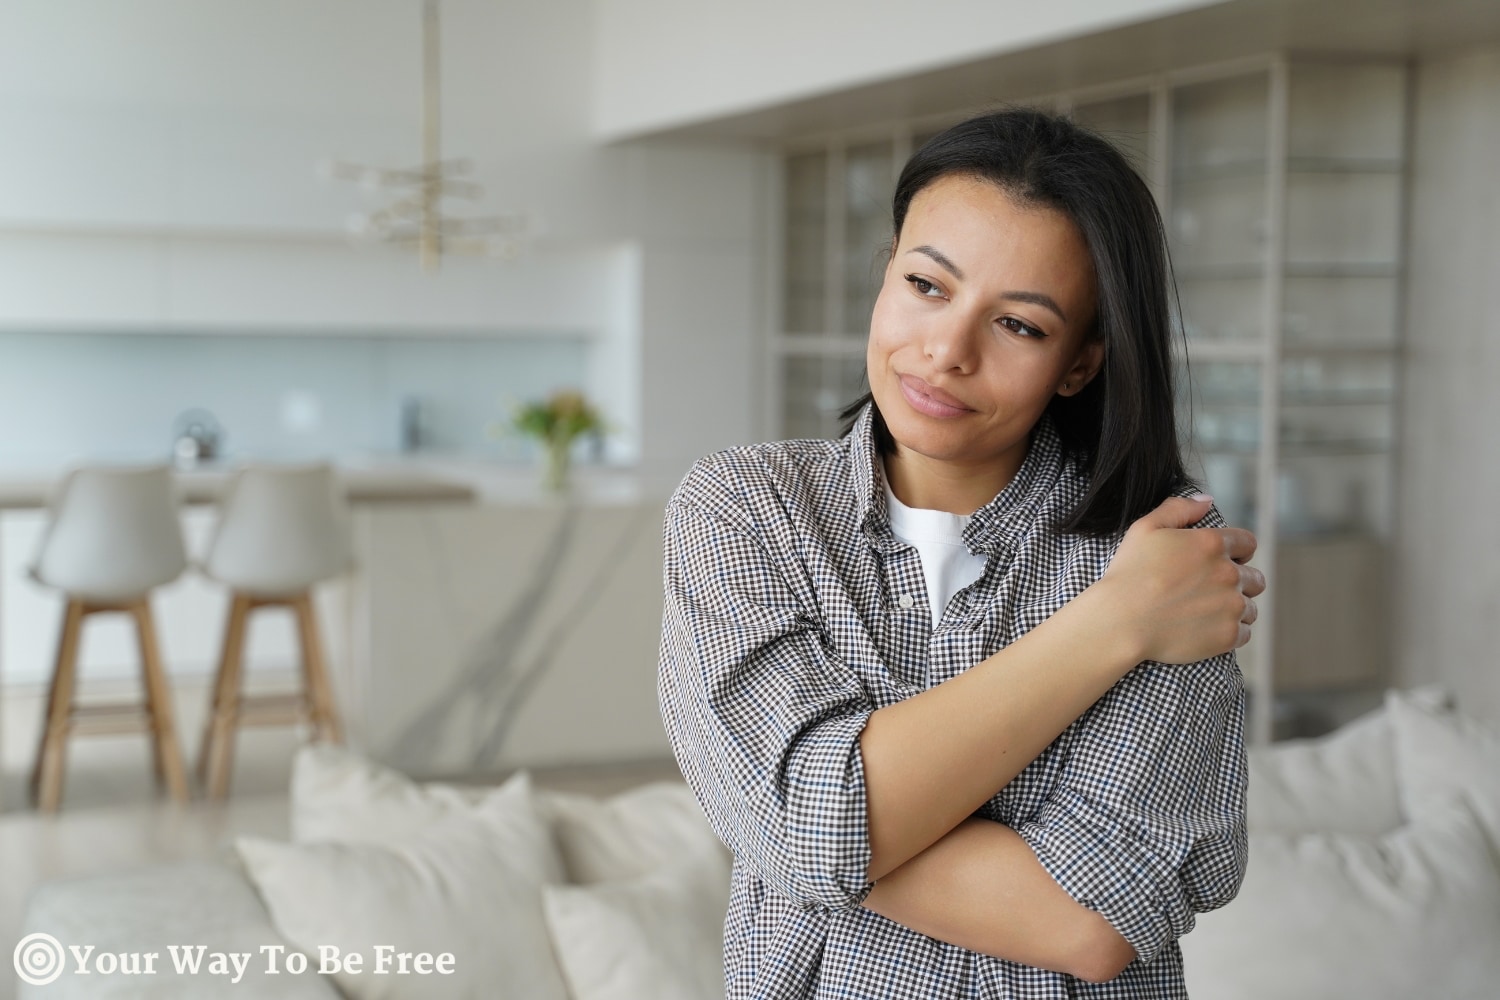 A woman hugging herself showing how to healing ourselves with self-compassion